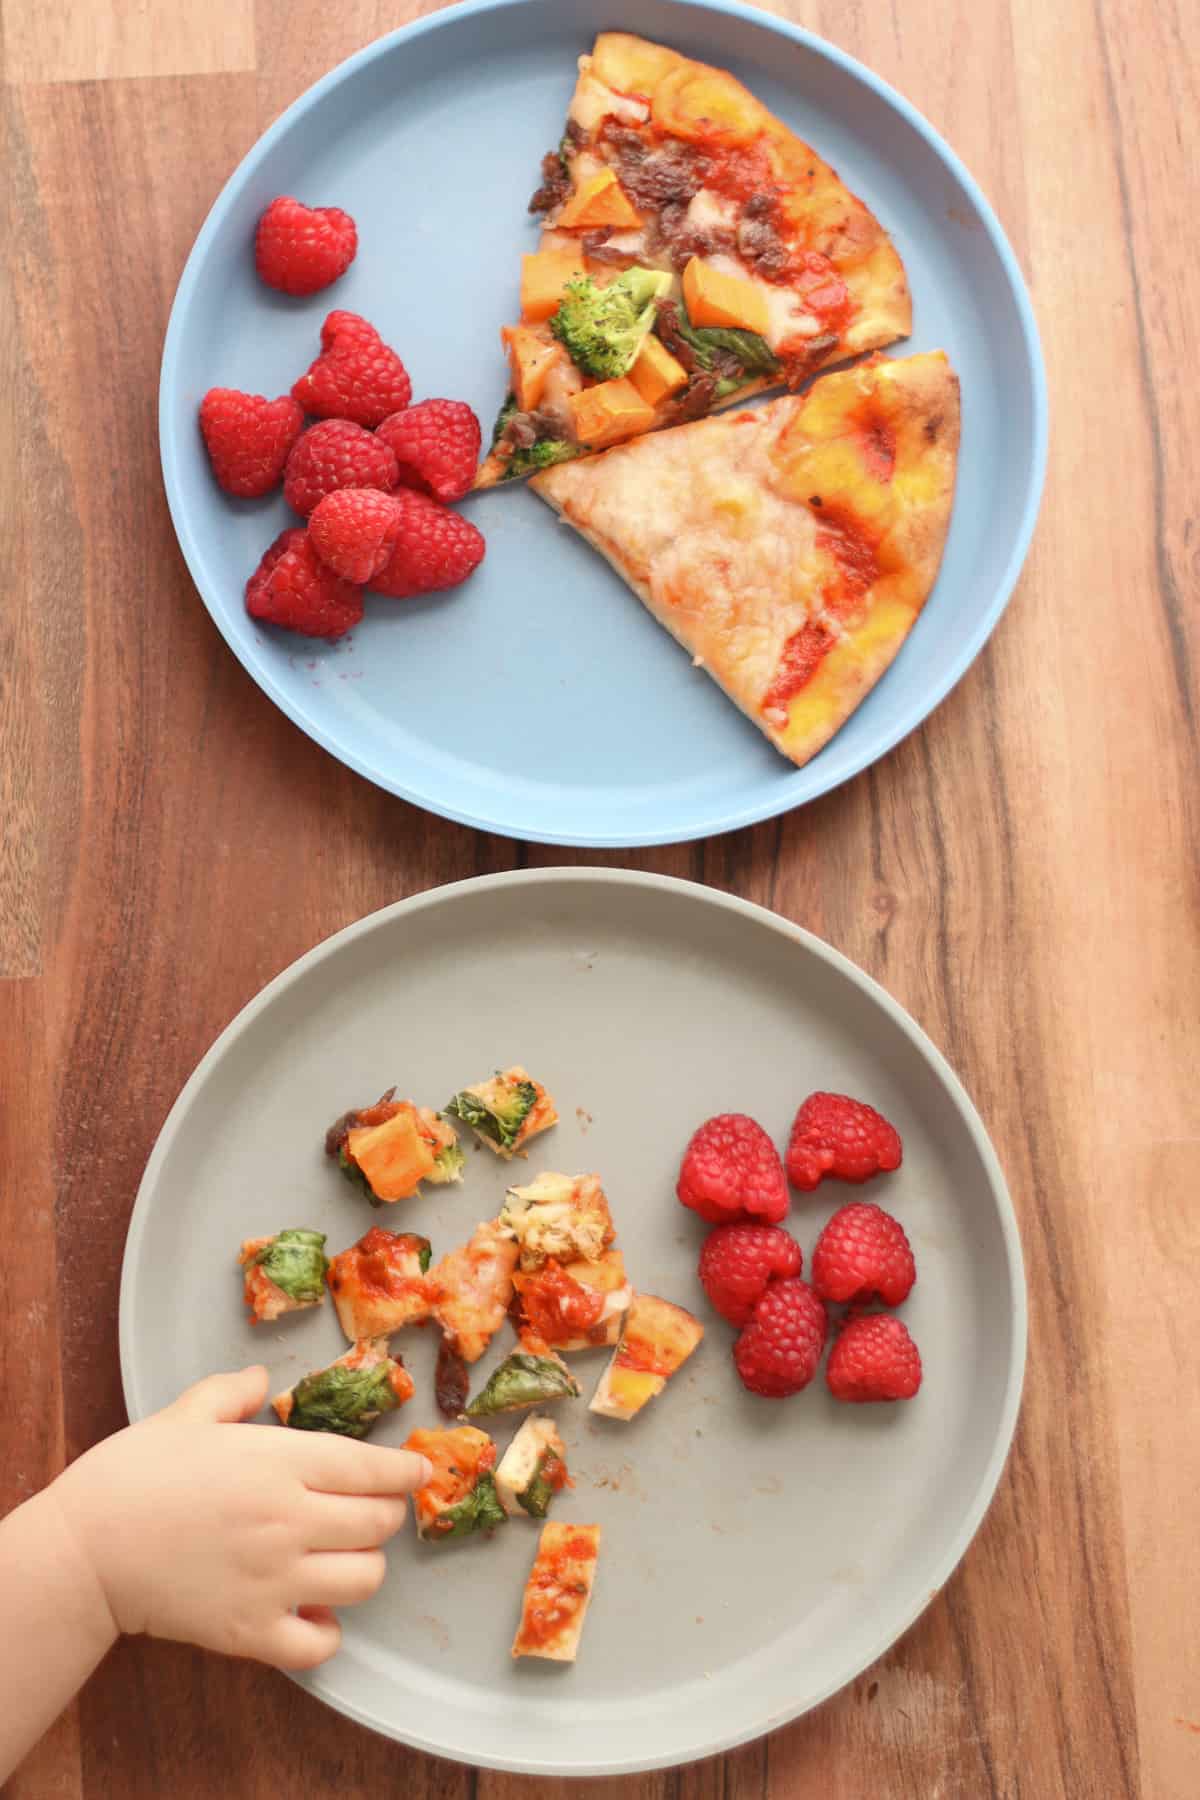 Two plates with raspberries and two pizza slices in one and bite-sized pieces in another.